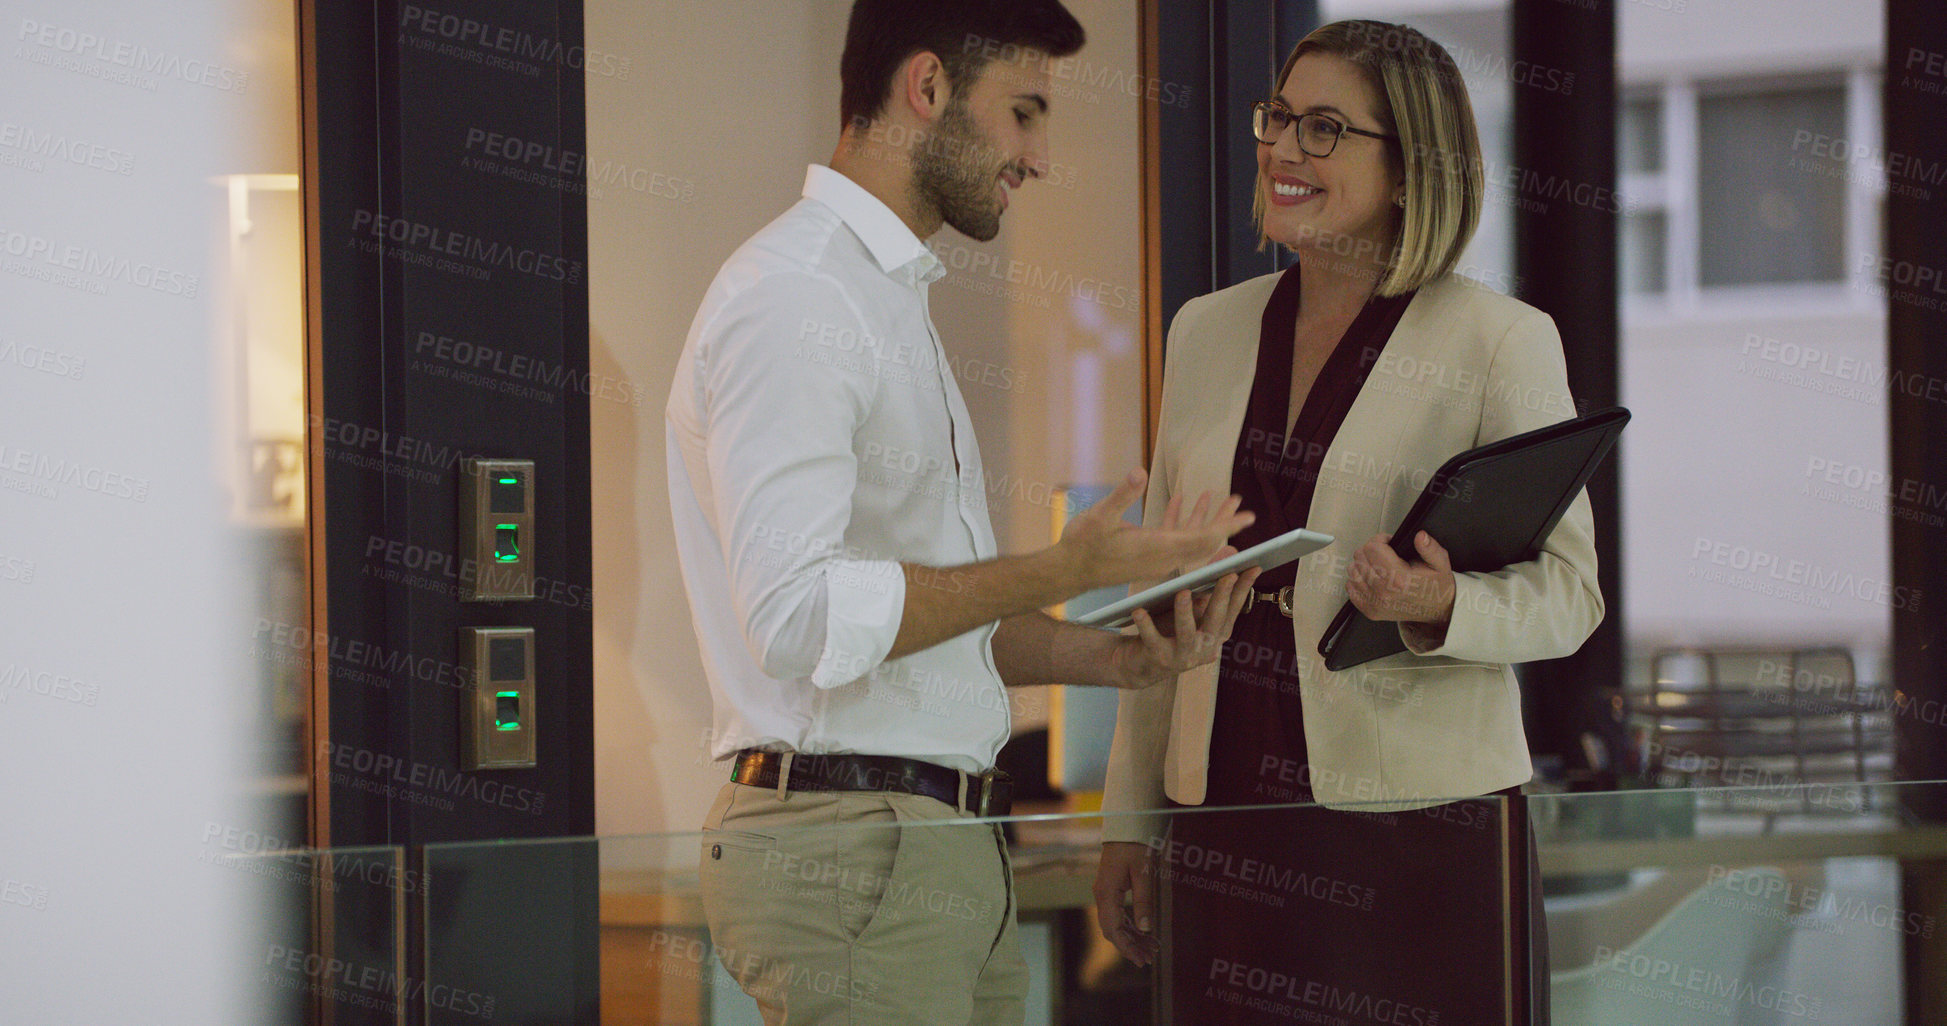 Buy stock photo Cropped shot of two businesspeople looking over a tablet while standing in the office lobby